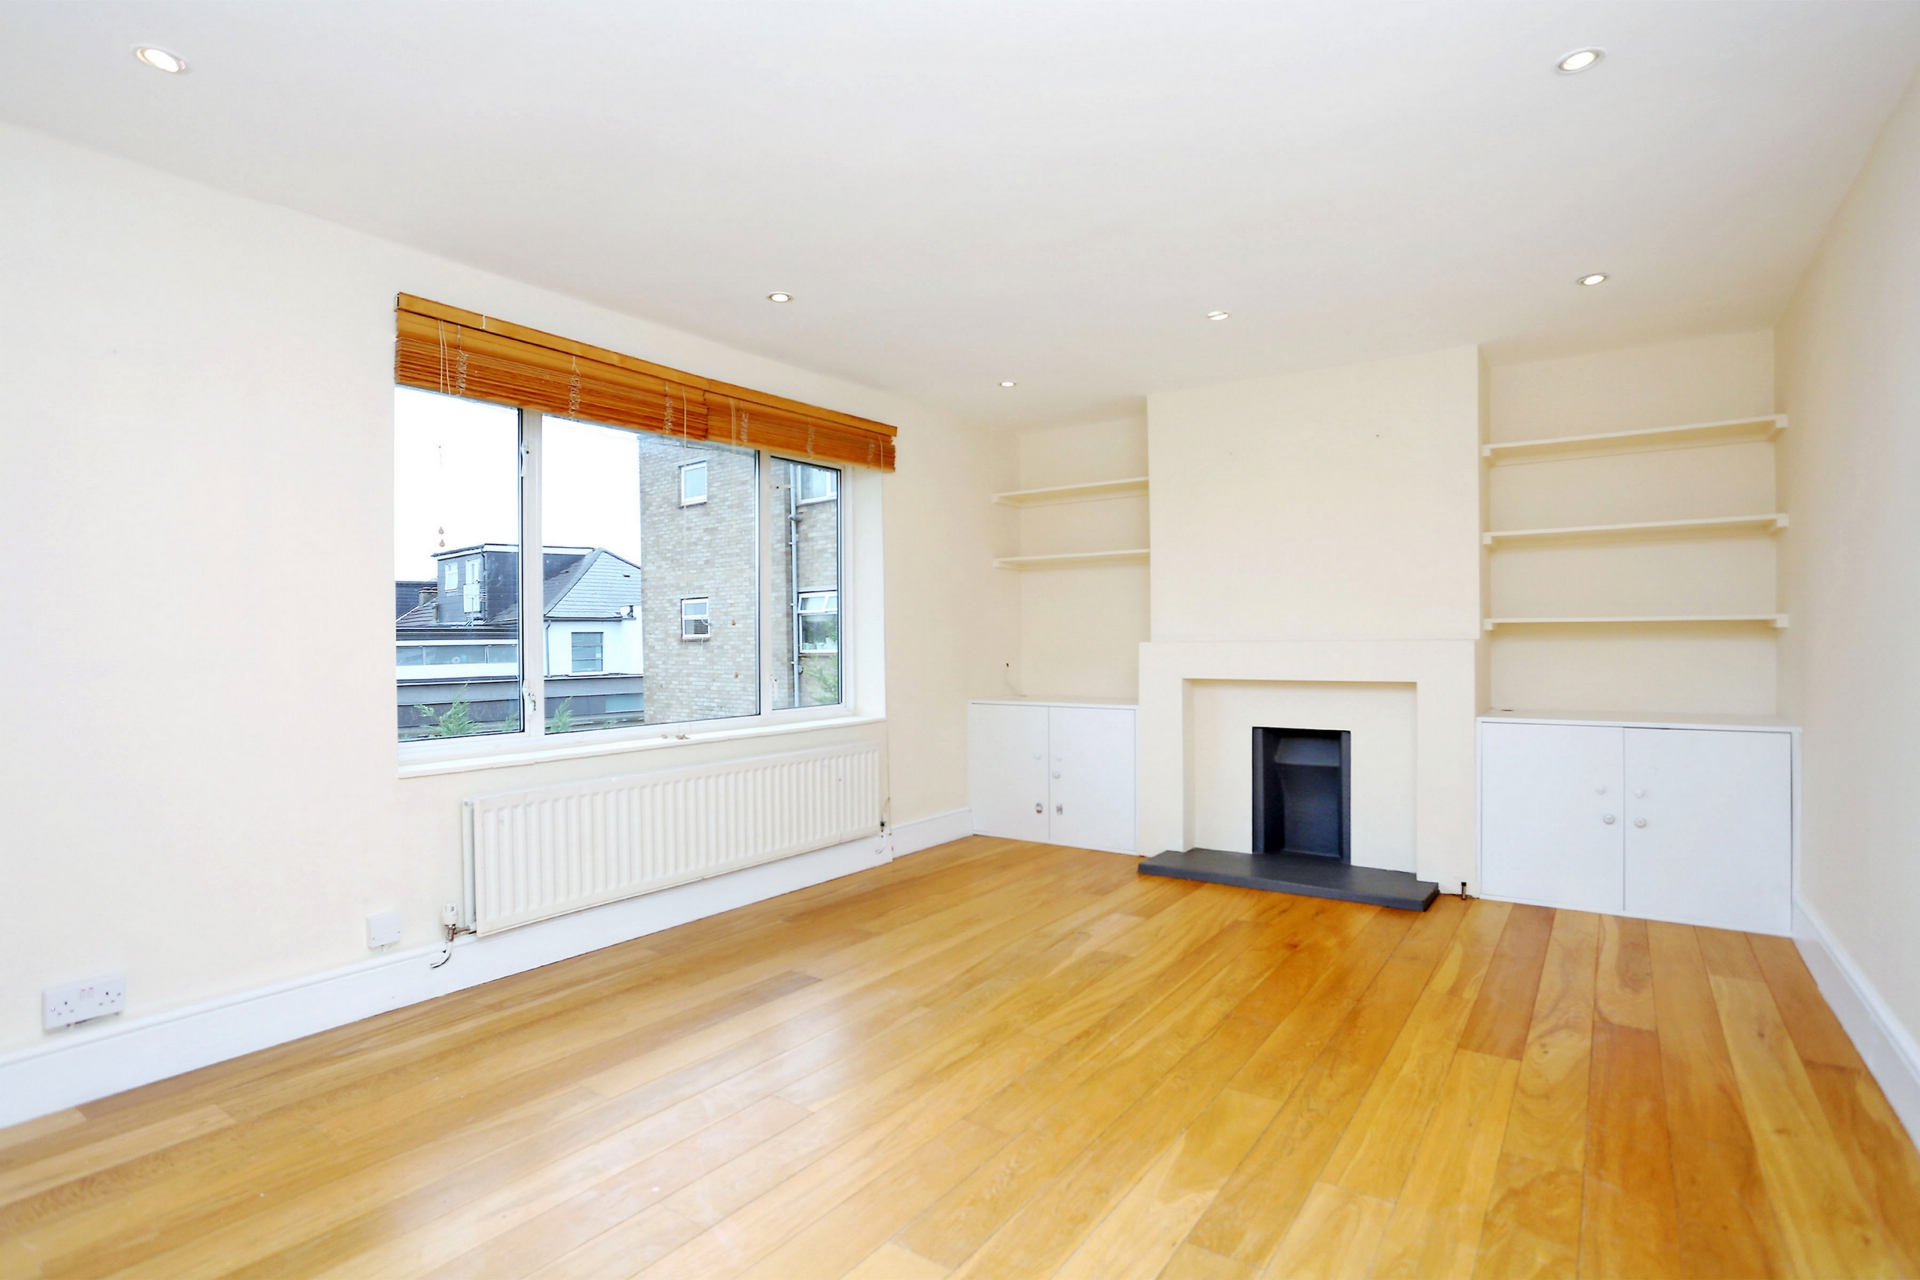 3 Bedroom Flat to rent in Hanwell, London, W7